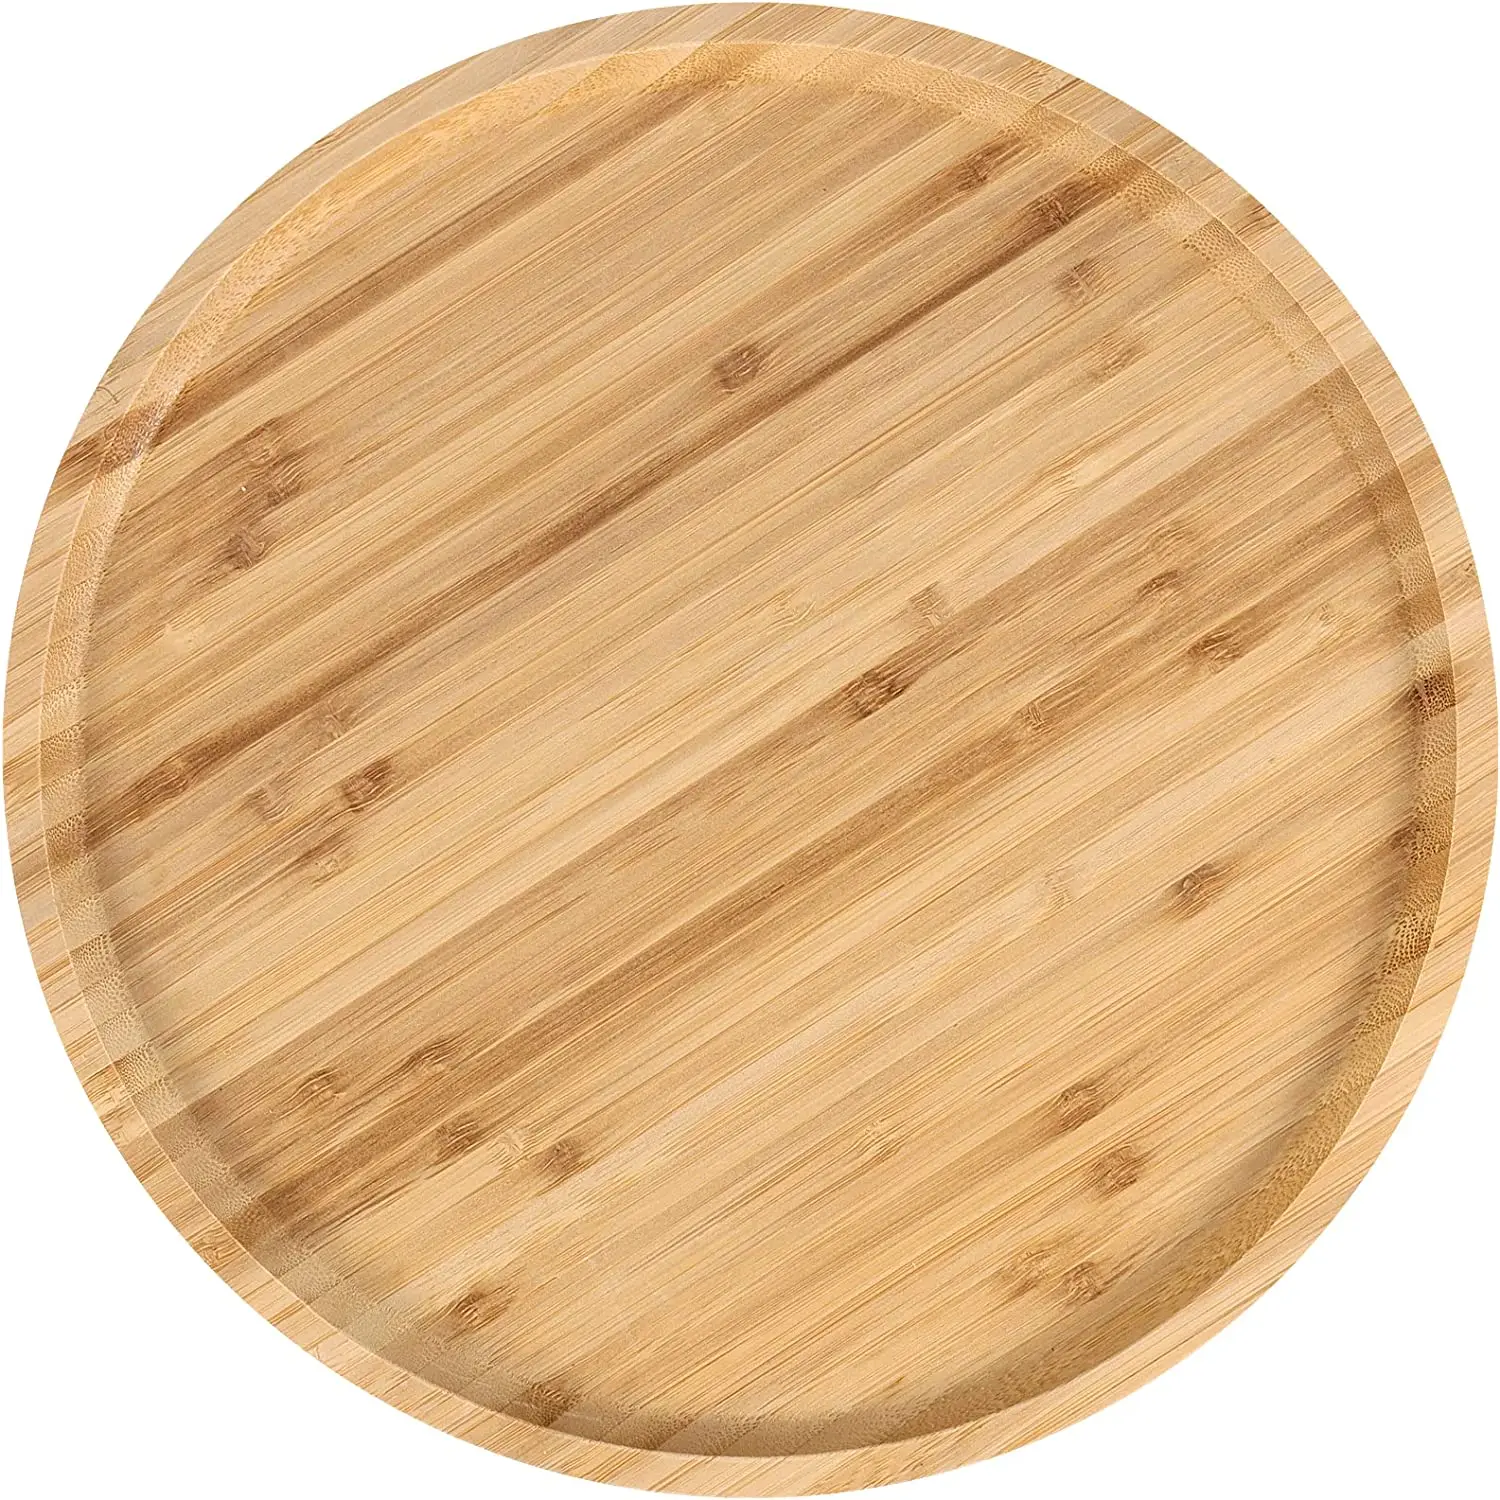 Wooden Compartment Cheese Appetizer Plate Bamboo Cookie Dessert Serving Platter Tray Chip and Dip Dish Section Plates